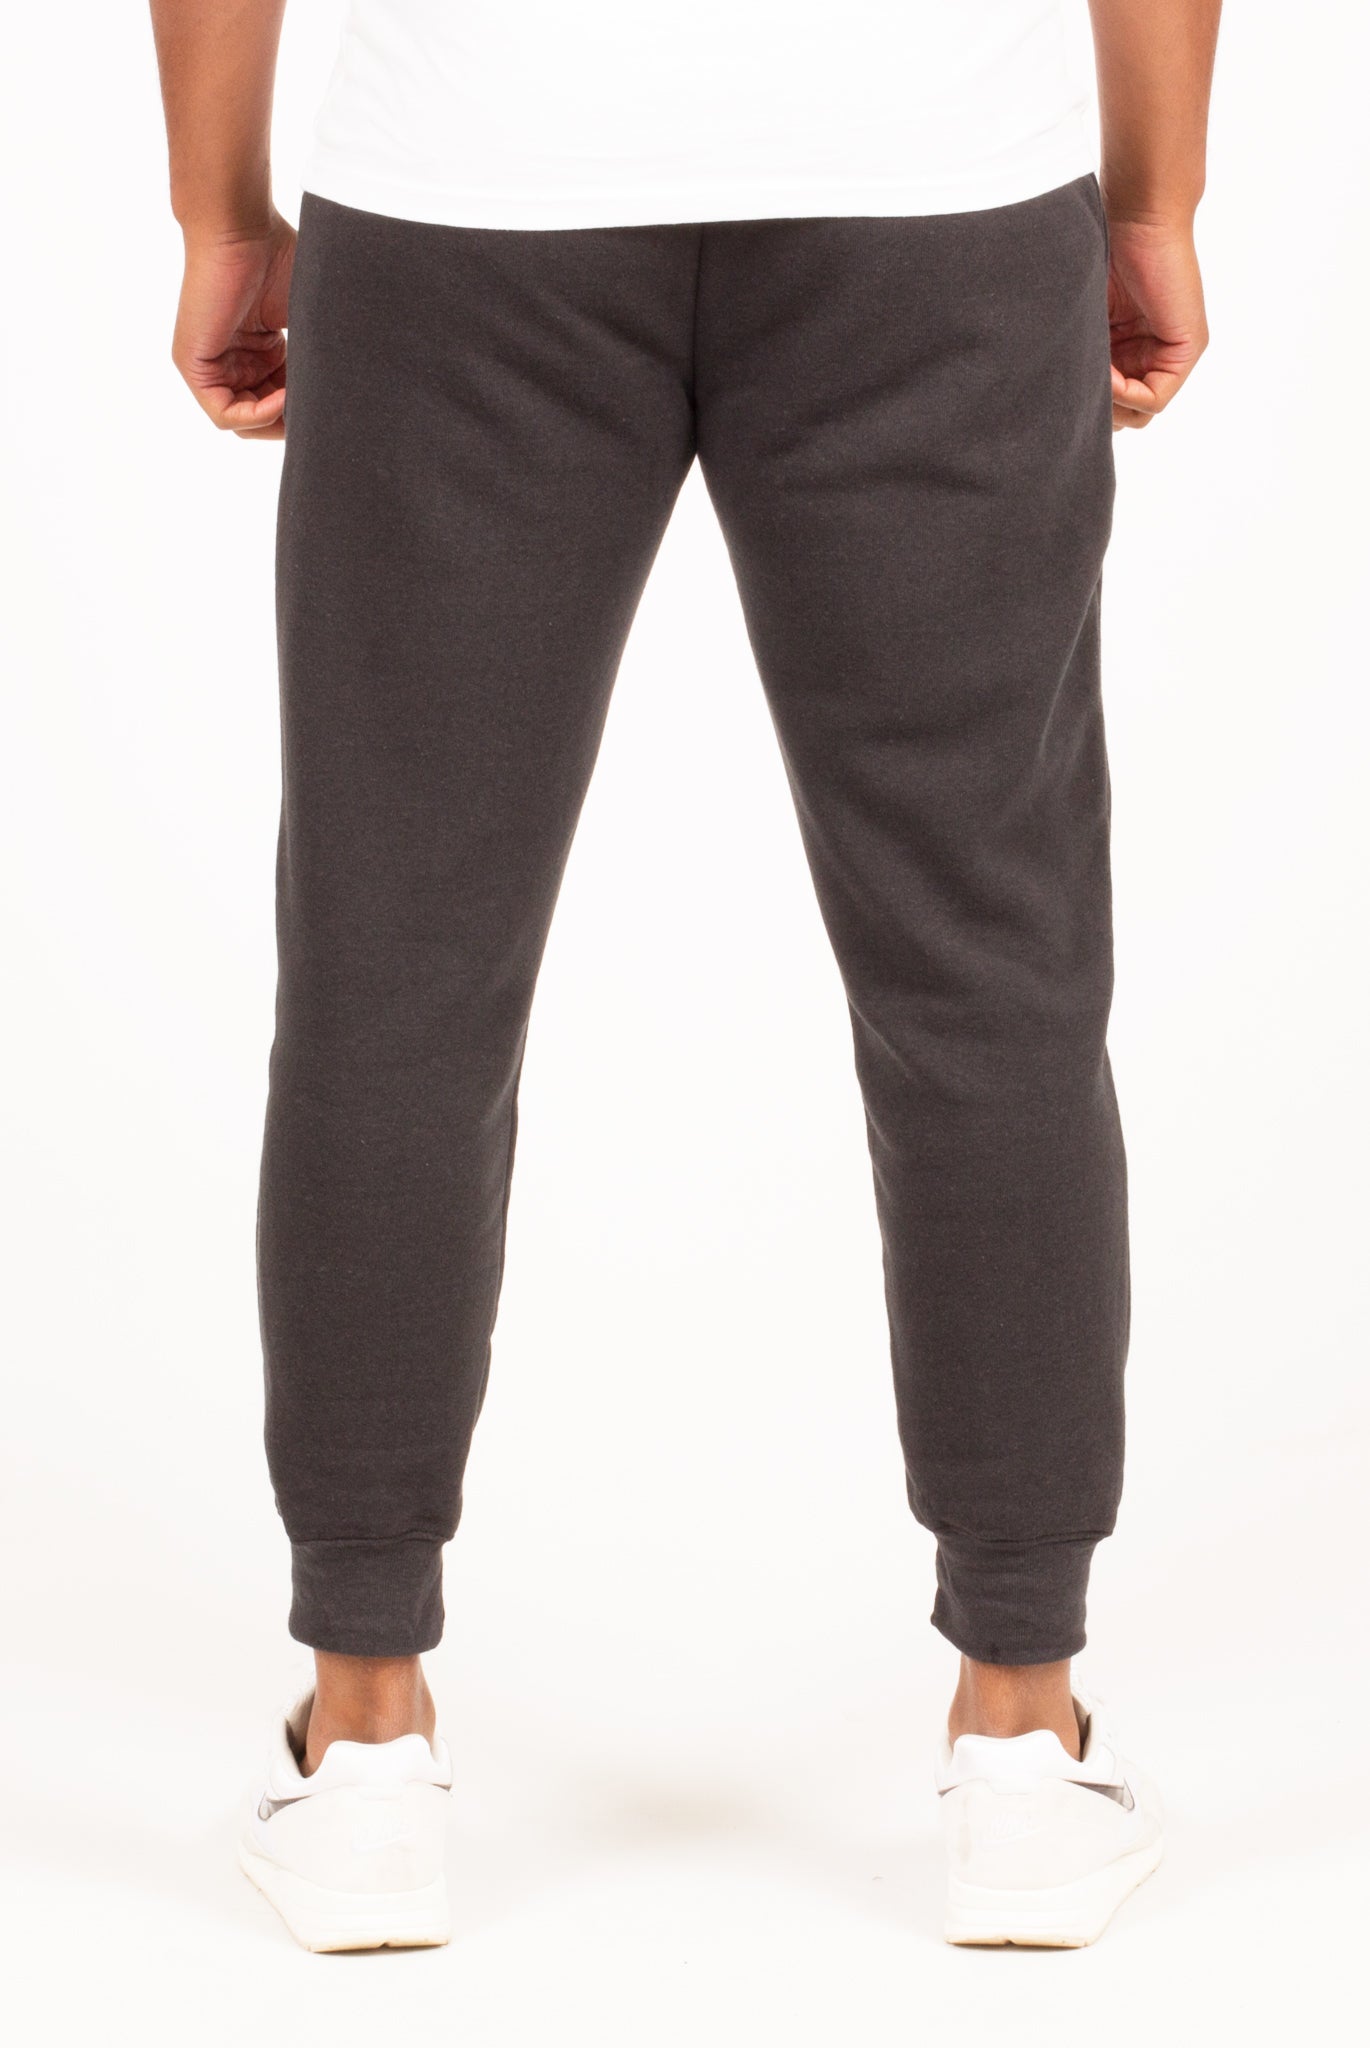 FADED BLACK JOGGERS | Poor Little Rich Boy Clothing